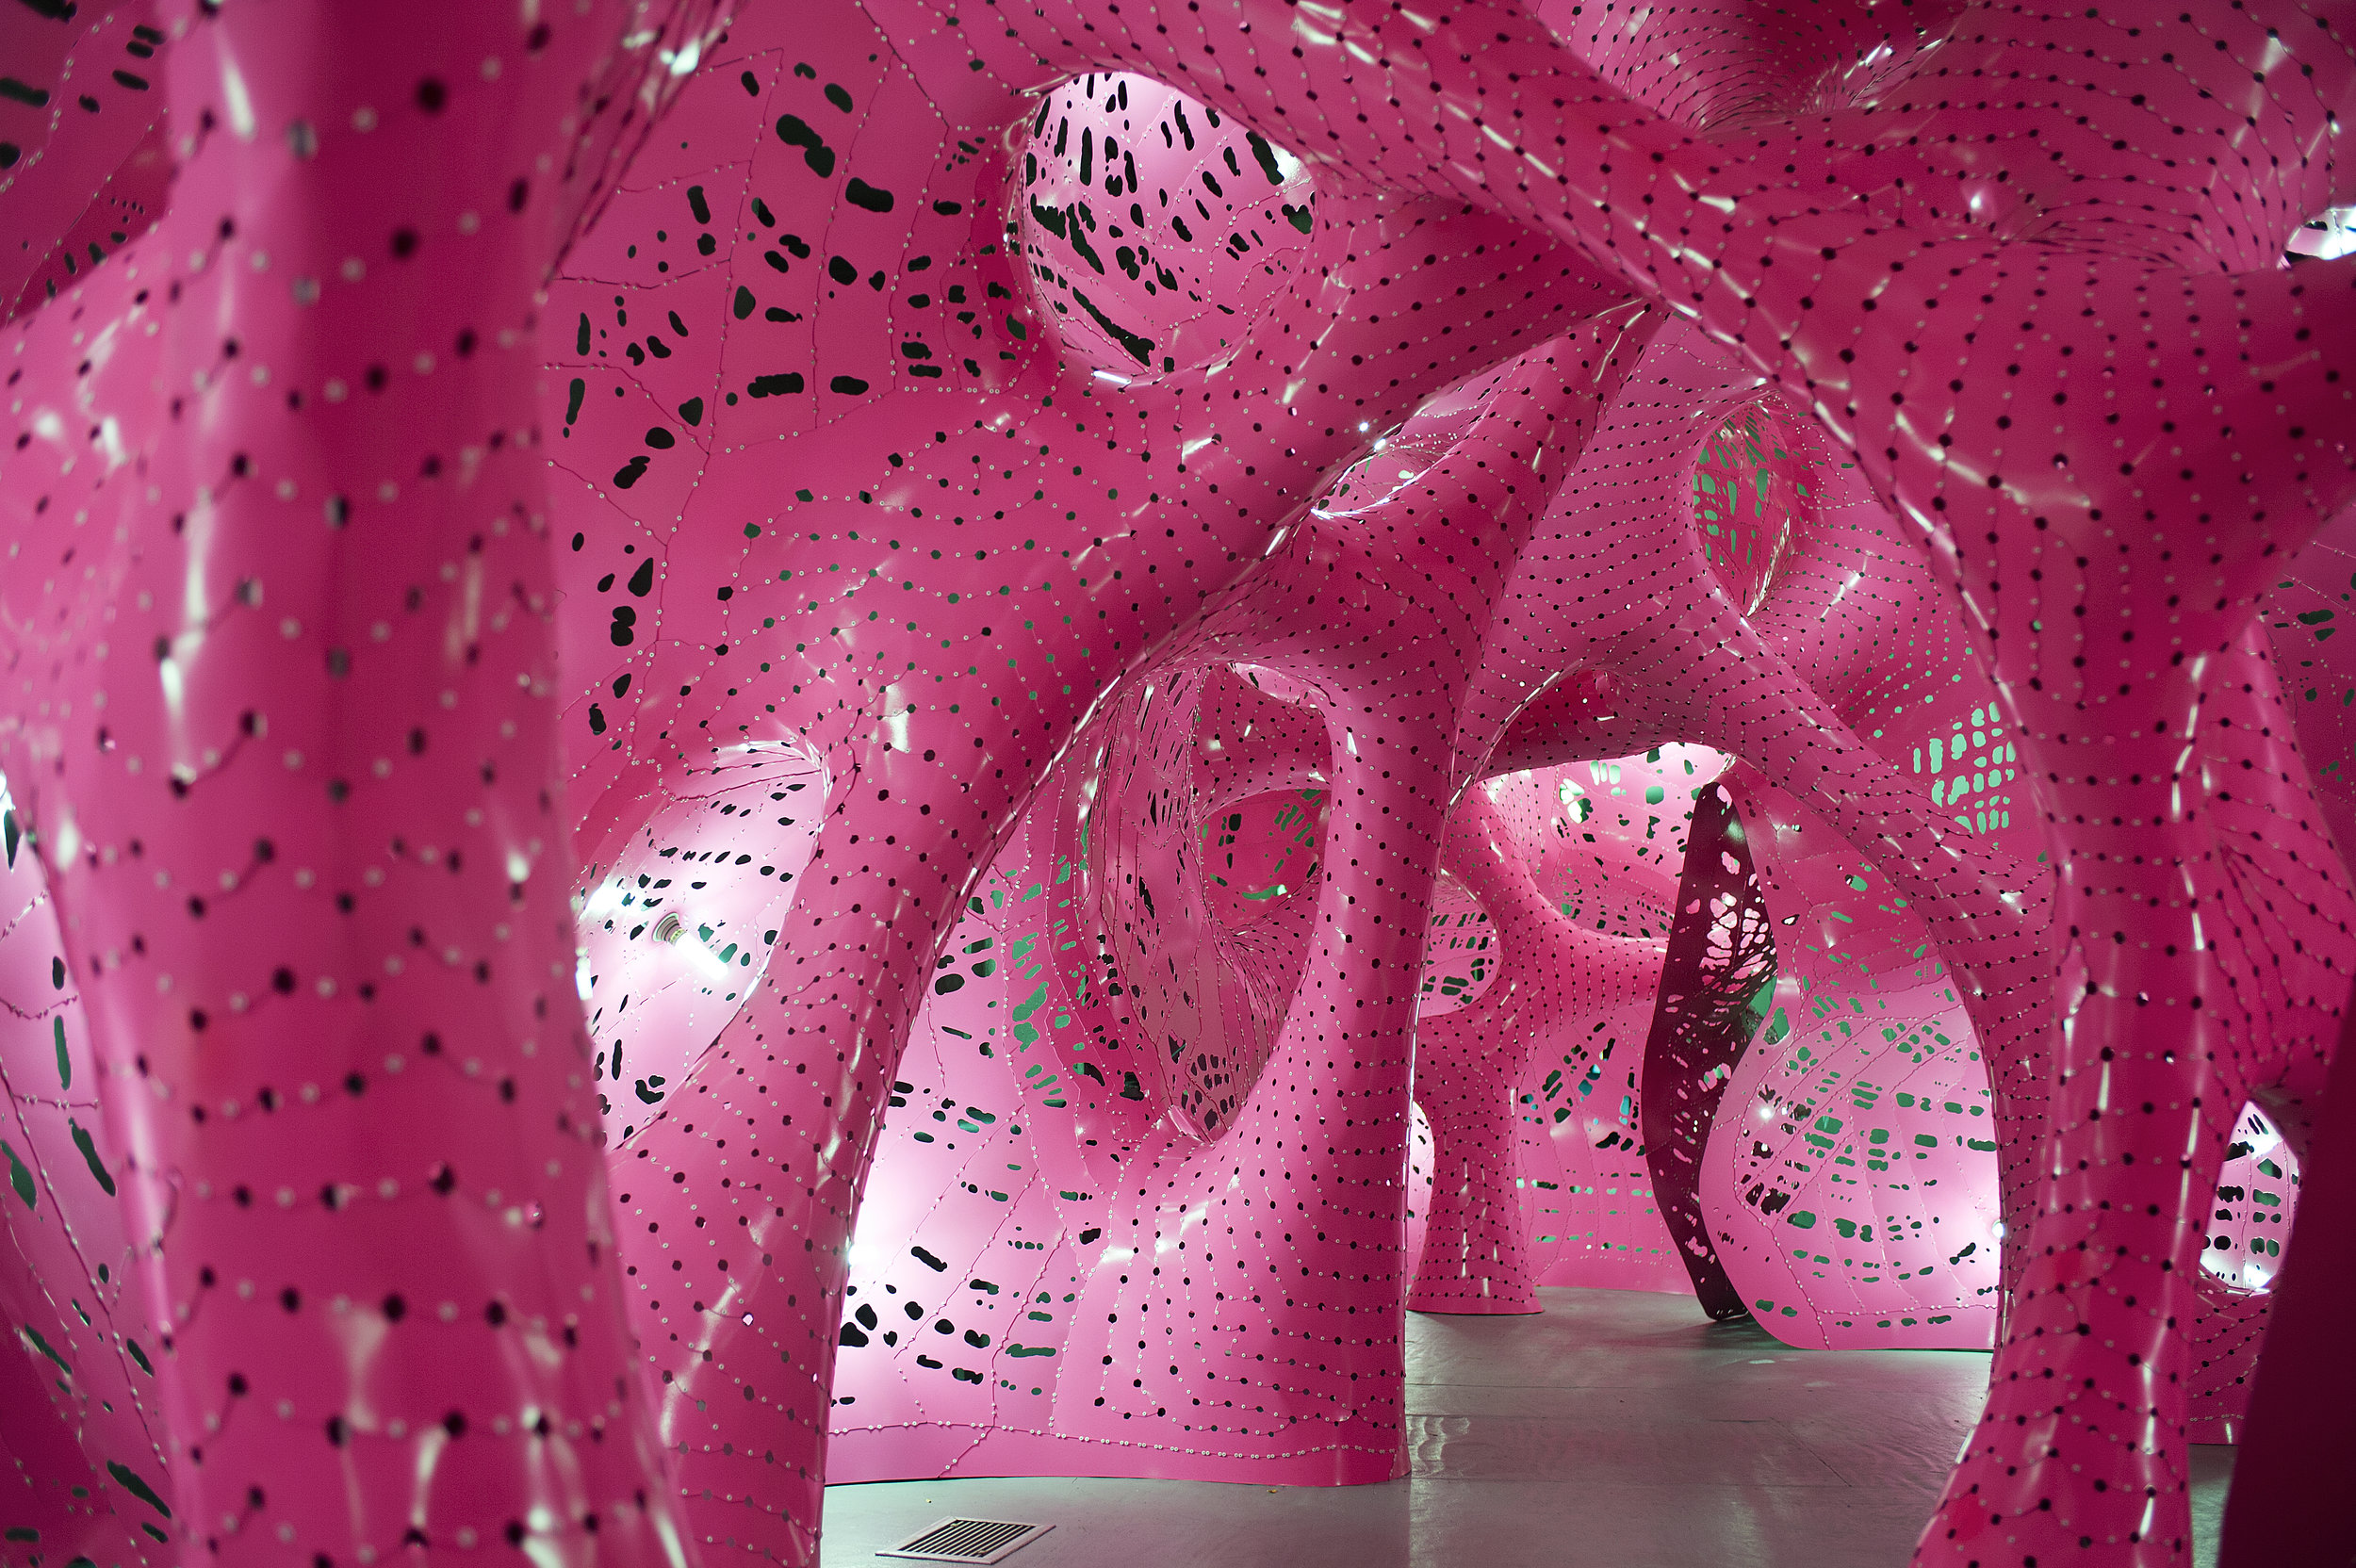 Art of the Prototypical — MARC FORNES / THEVERYMANY